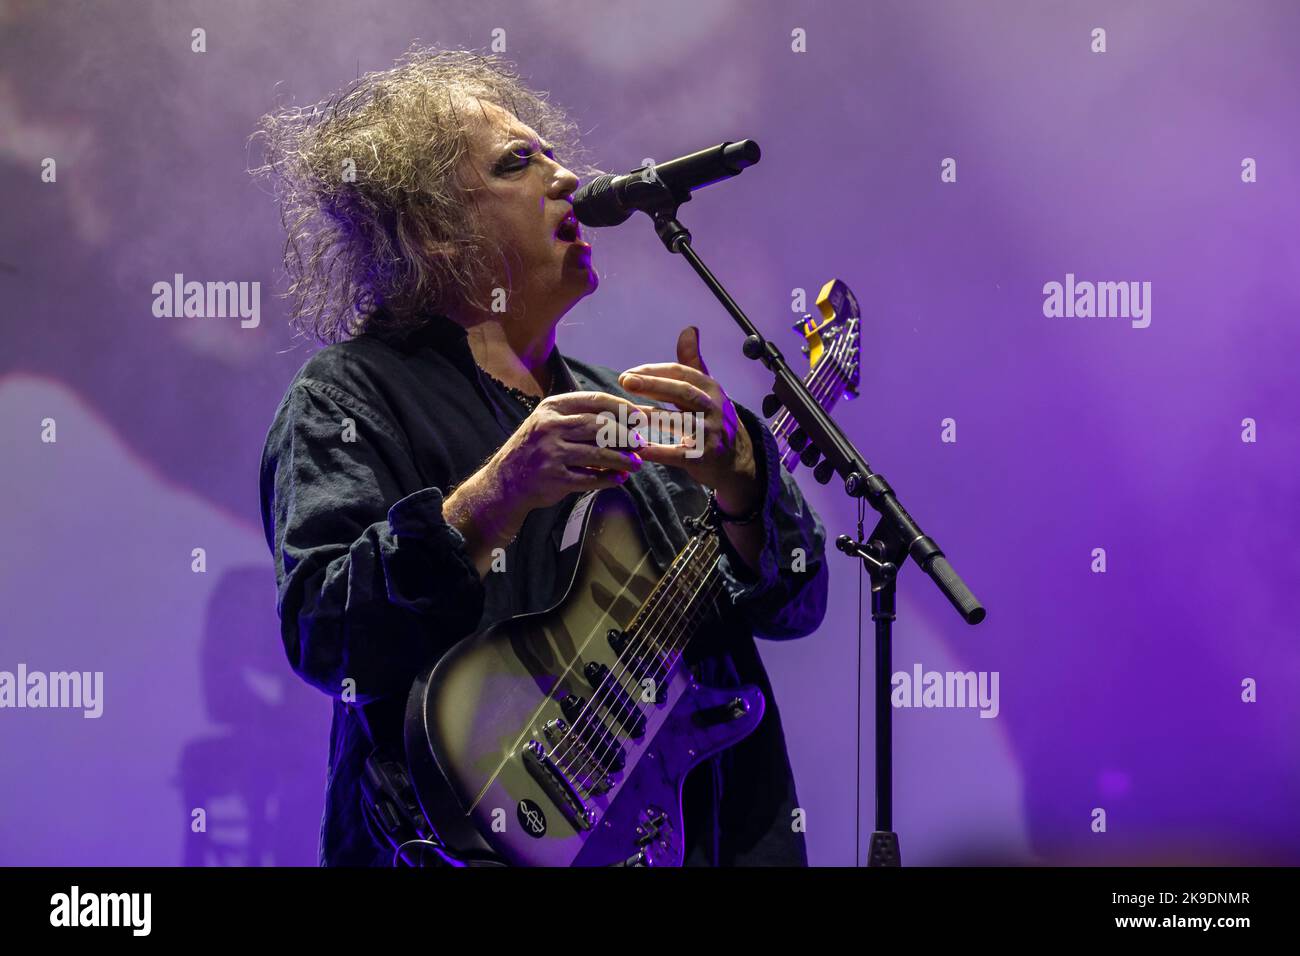 October. 27th 2022. Zagreb, Croatia -The famous British singer Robert Smith with his gothic rock band, The Cure, performing a live concert Stock Photo